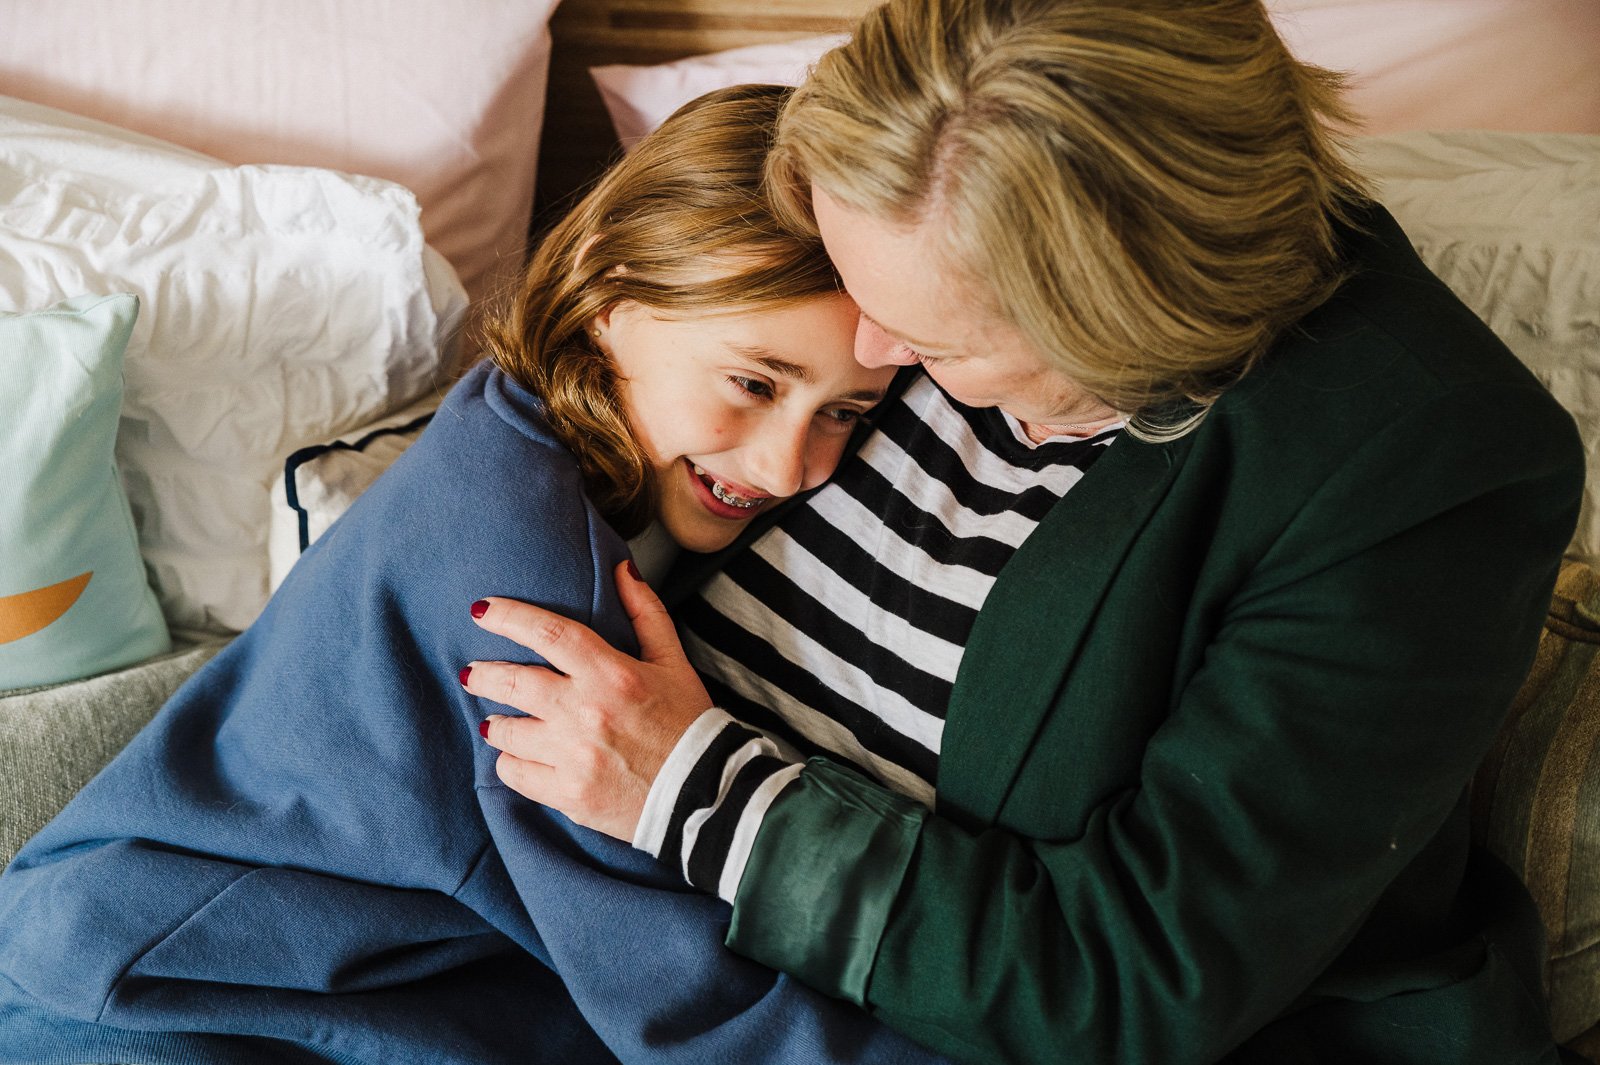 mother_and_daughter_cuddling_together_on_bed_at_home_family_photographer_melbouurrne-1.jpg